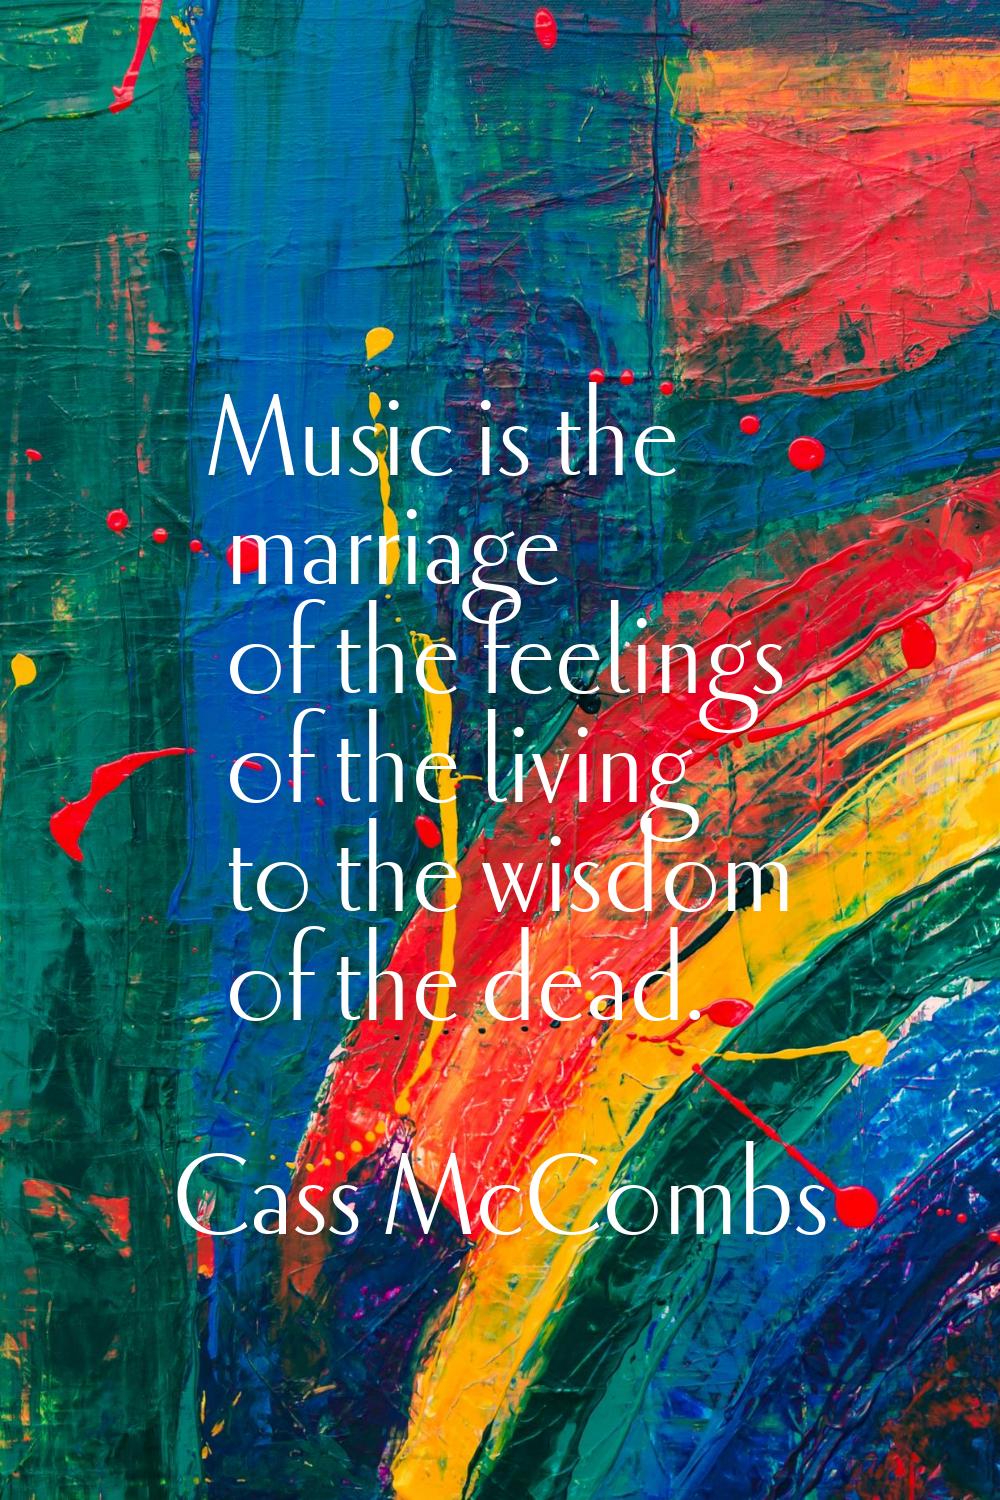 Music is the marriage of the feelings of the living to the wisdom of the dead.